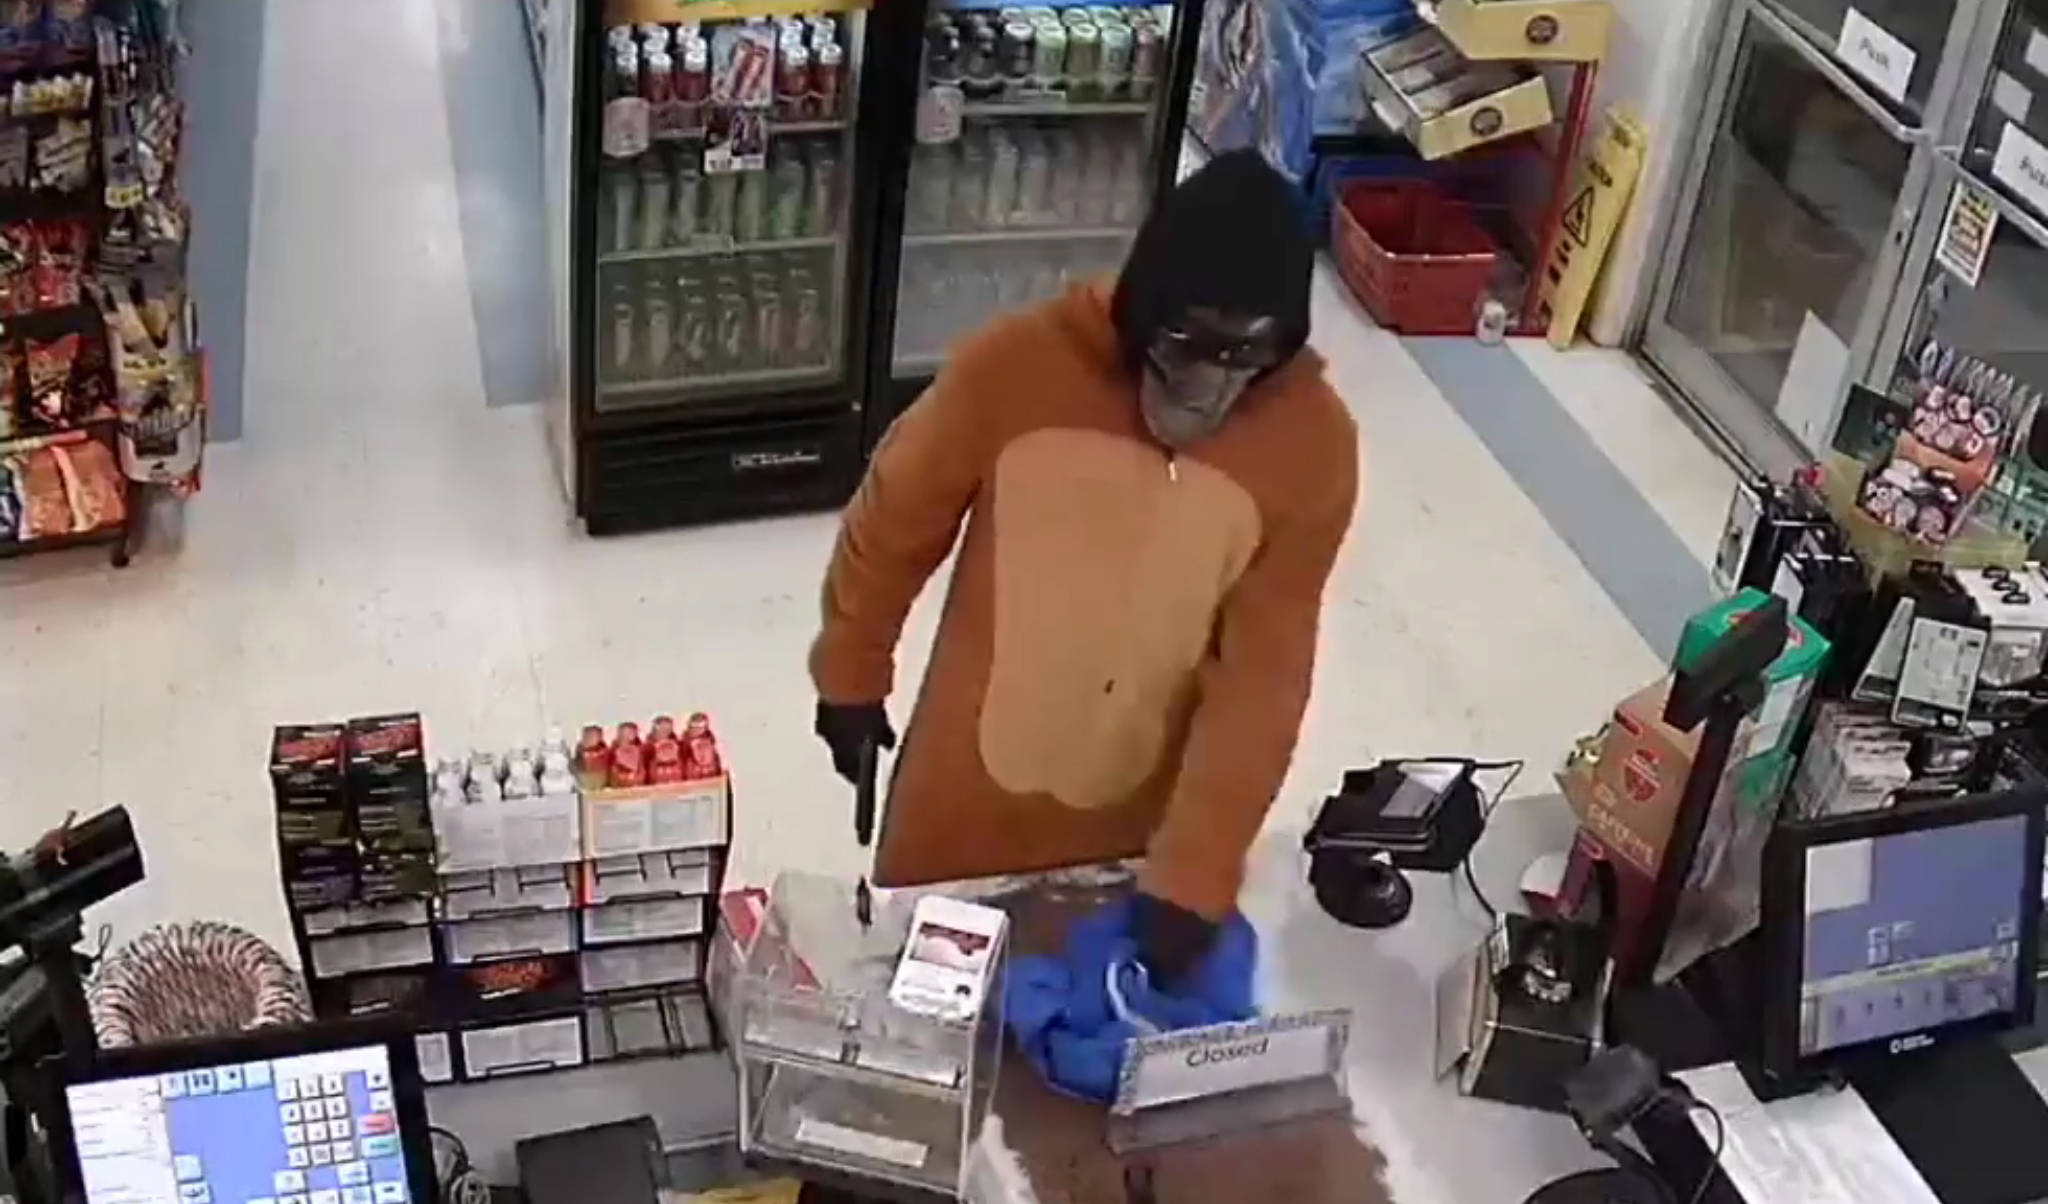 Sheriff’s Office wants help ID’ing costumed man who robbed Trafton Store; may be linked to 5 robberies in past week, 2 in Arlington